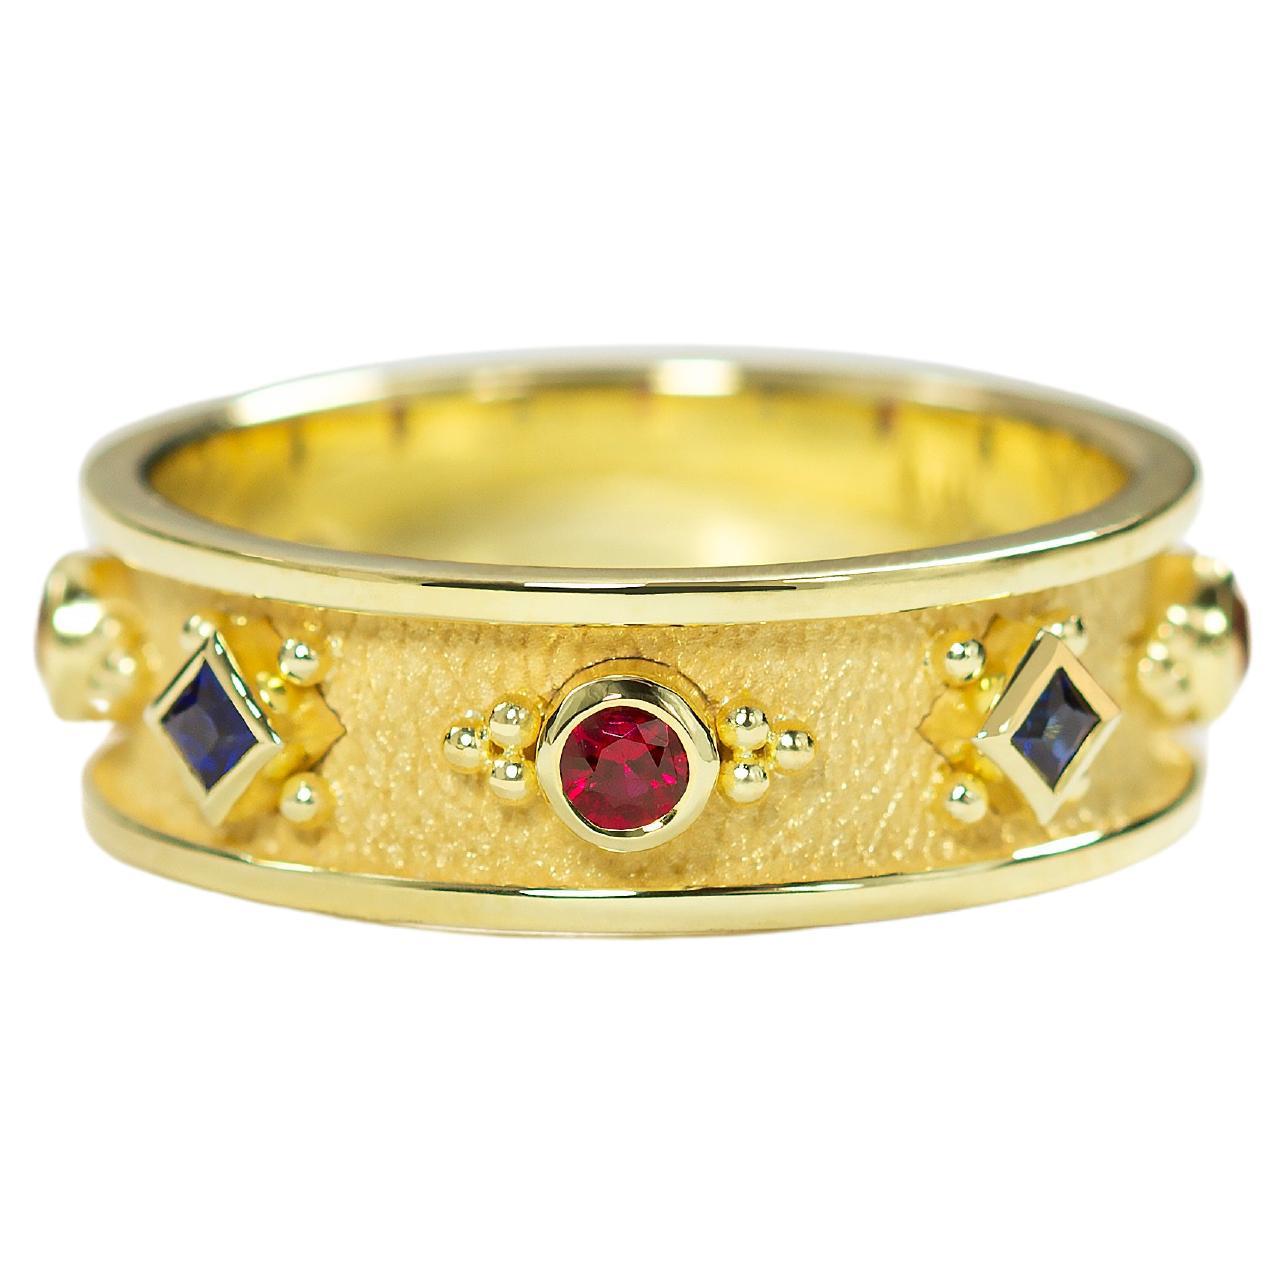 Gold Band Ring with Rubies and Sapphires